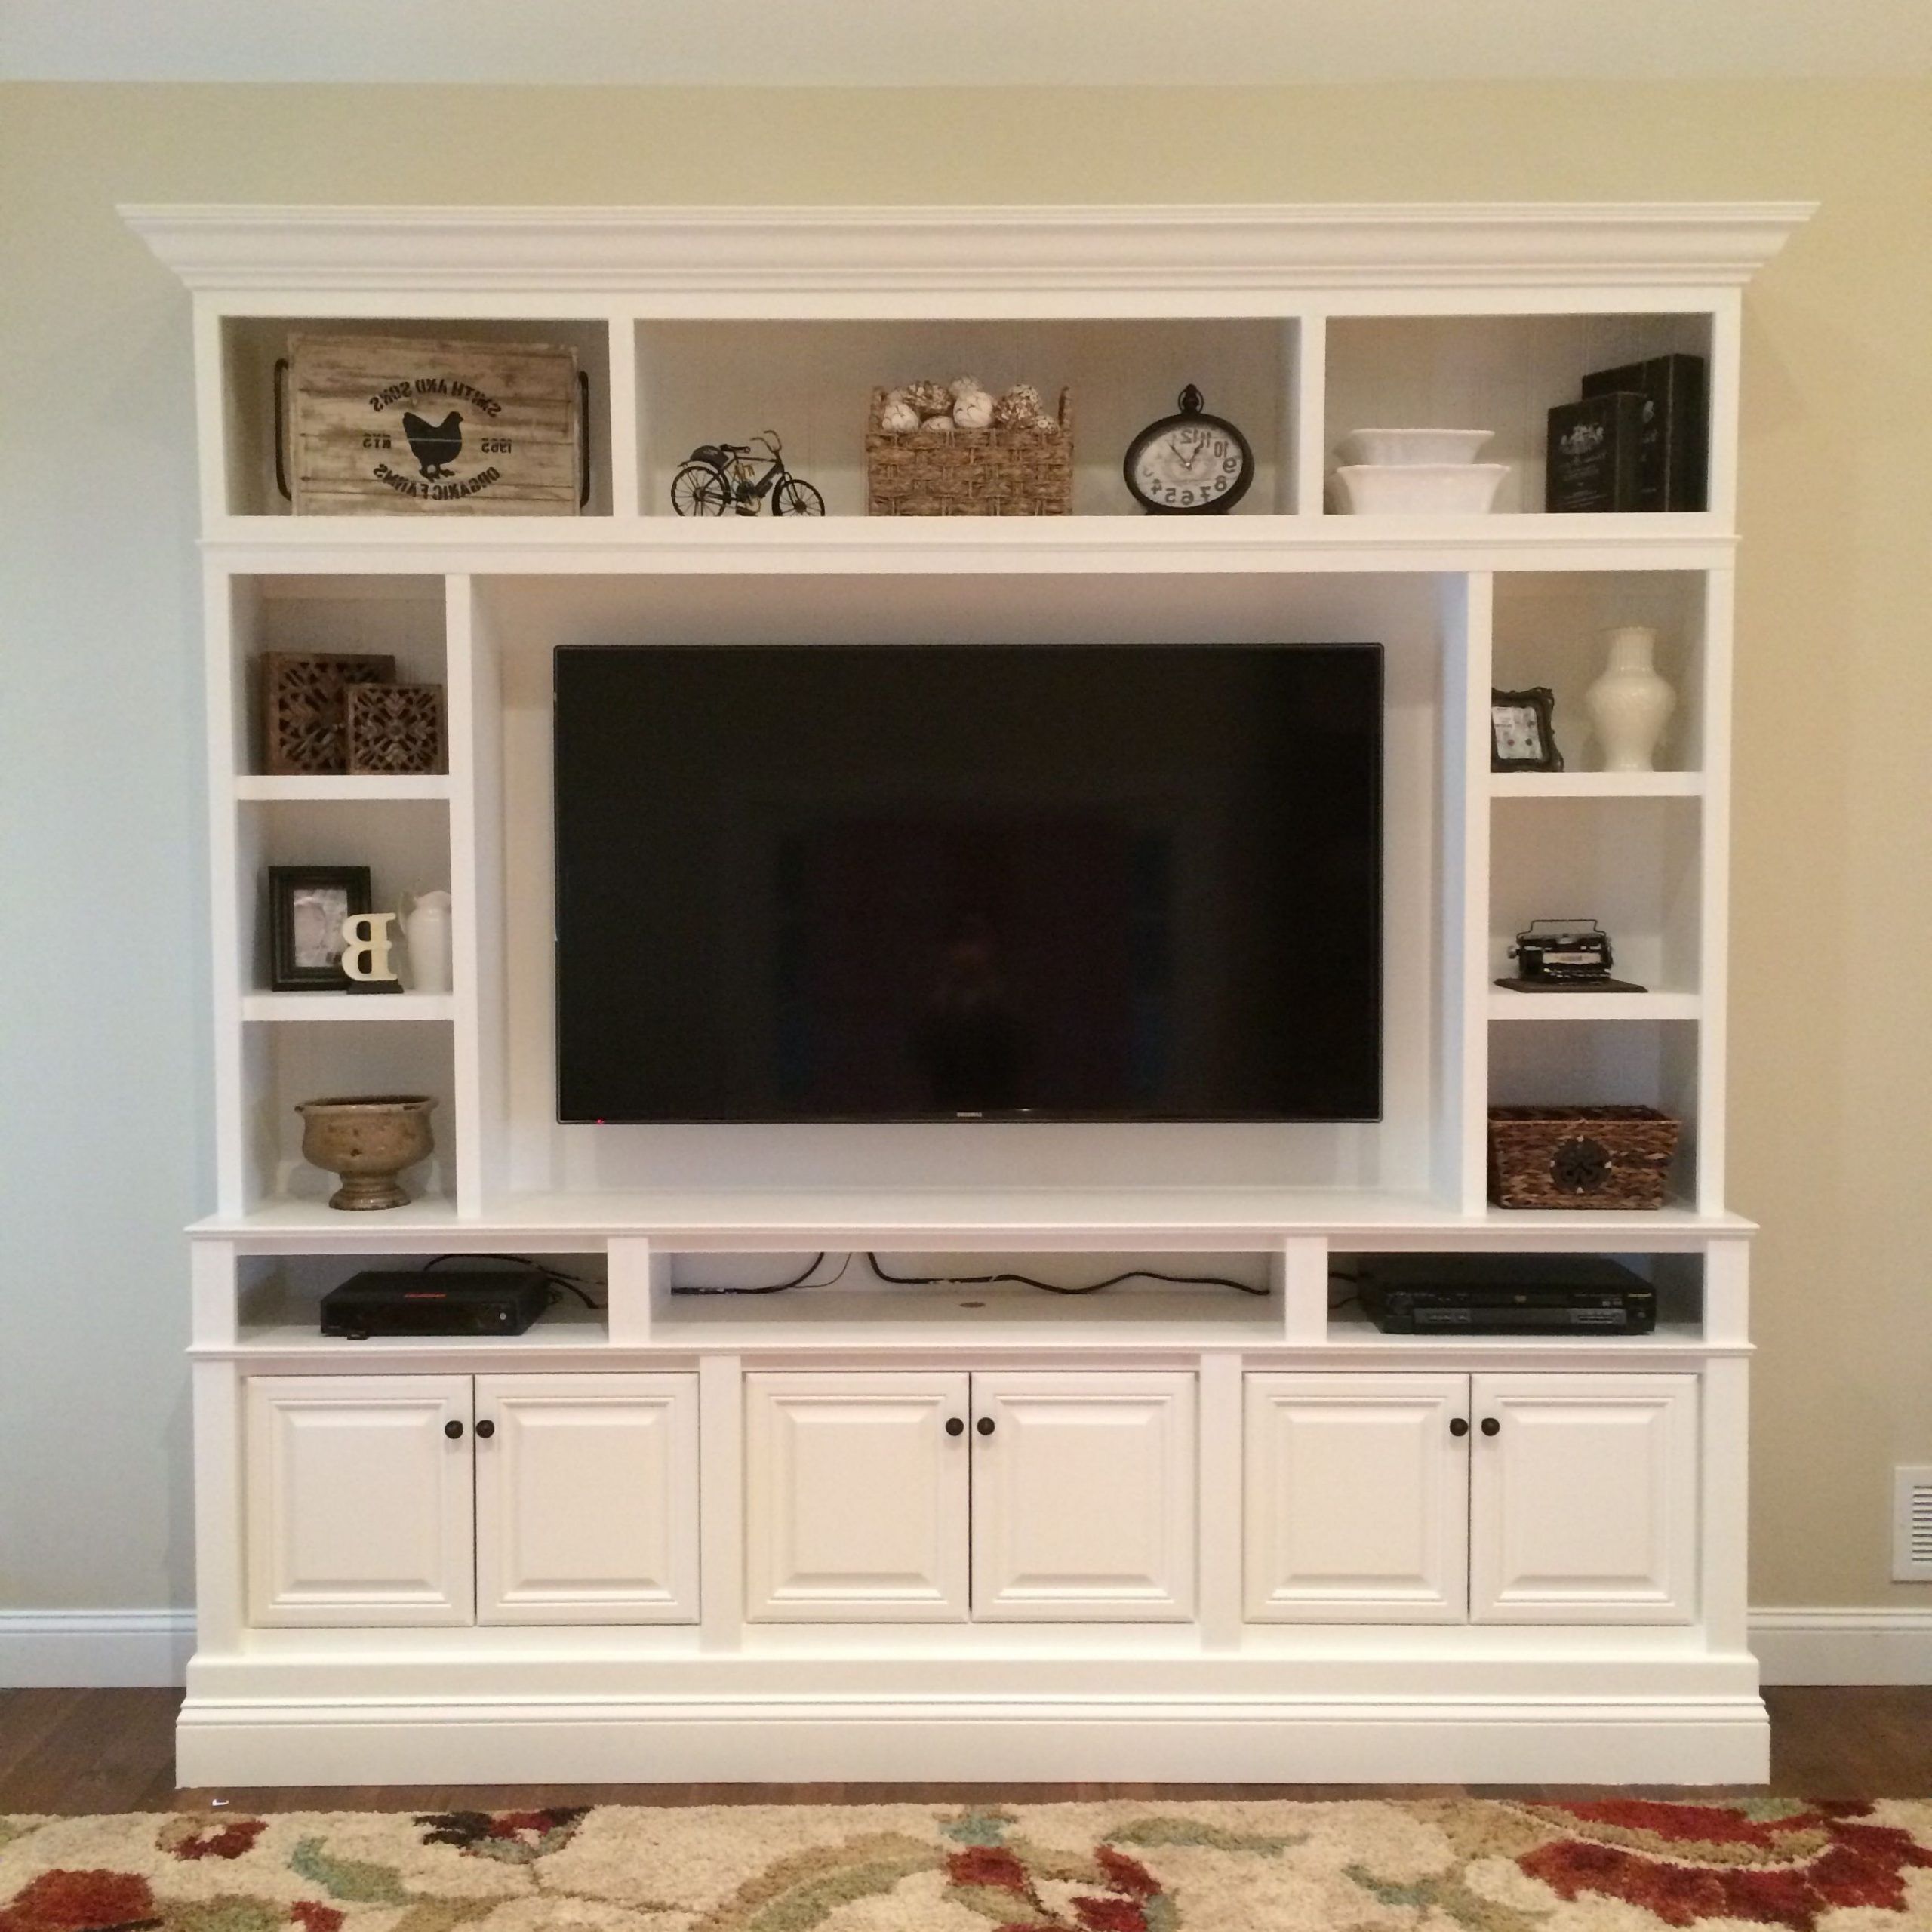 28+ Amazing Diy Tv Stand Ideas That You Can Build Right Intended For Diy Convertible Tv Stands And Bookcase (Gallery 1 of 20)